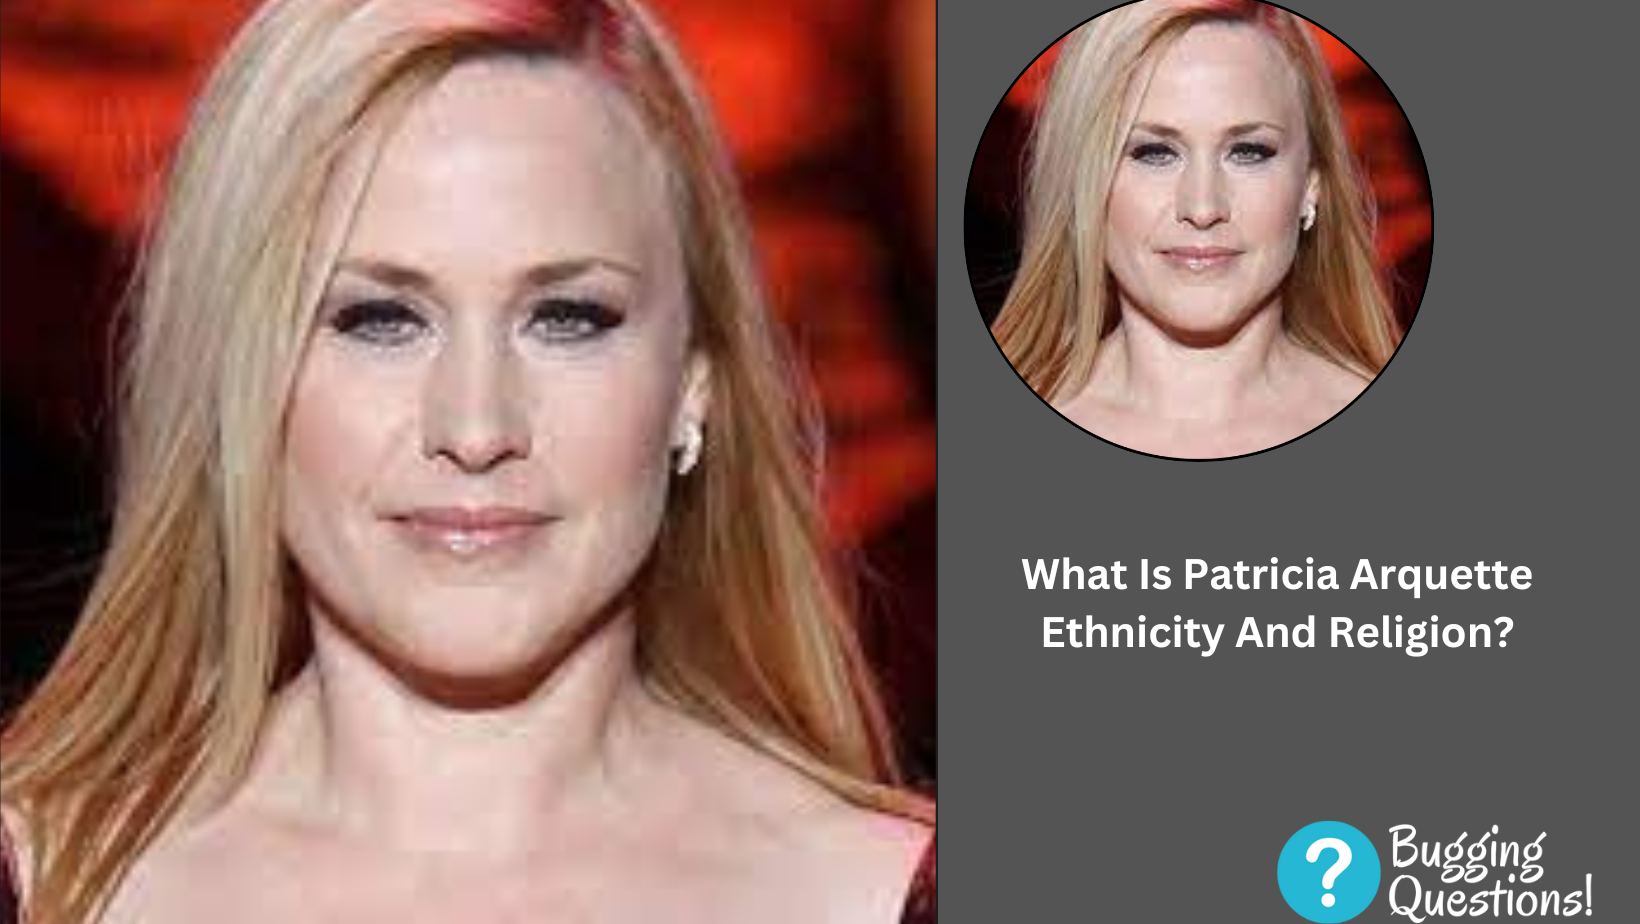 What Is Patricia Arquette Ethnicity And Religion?